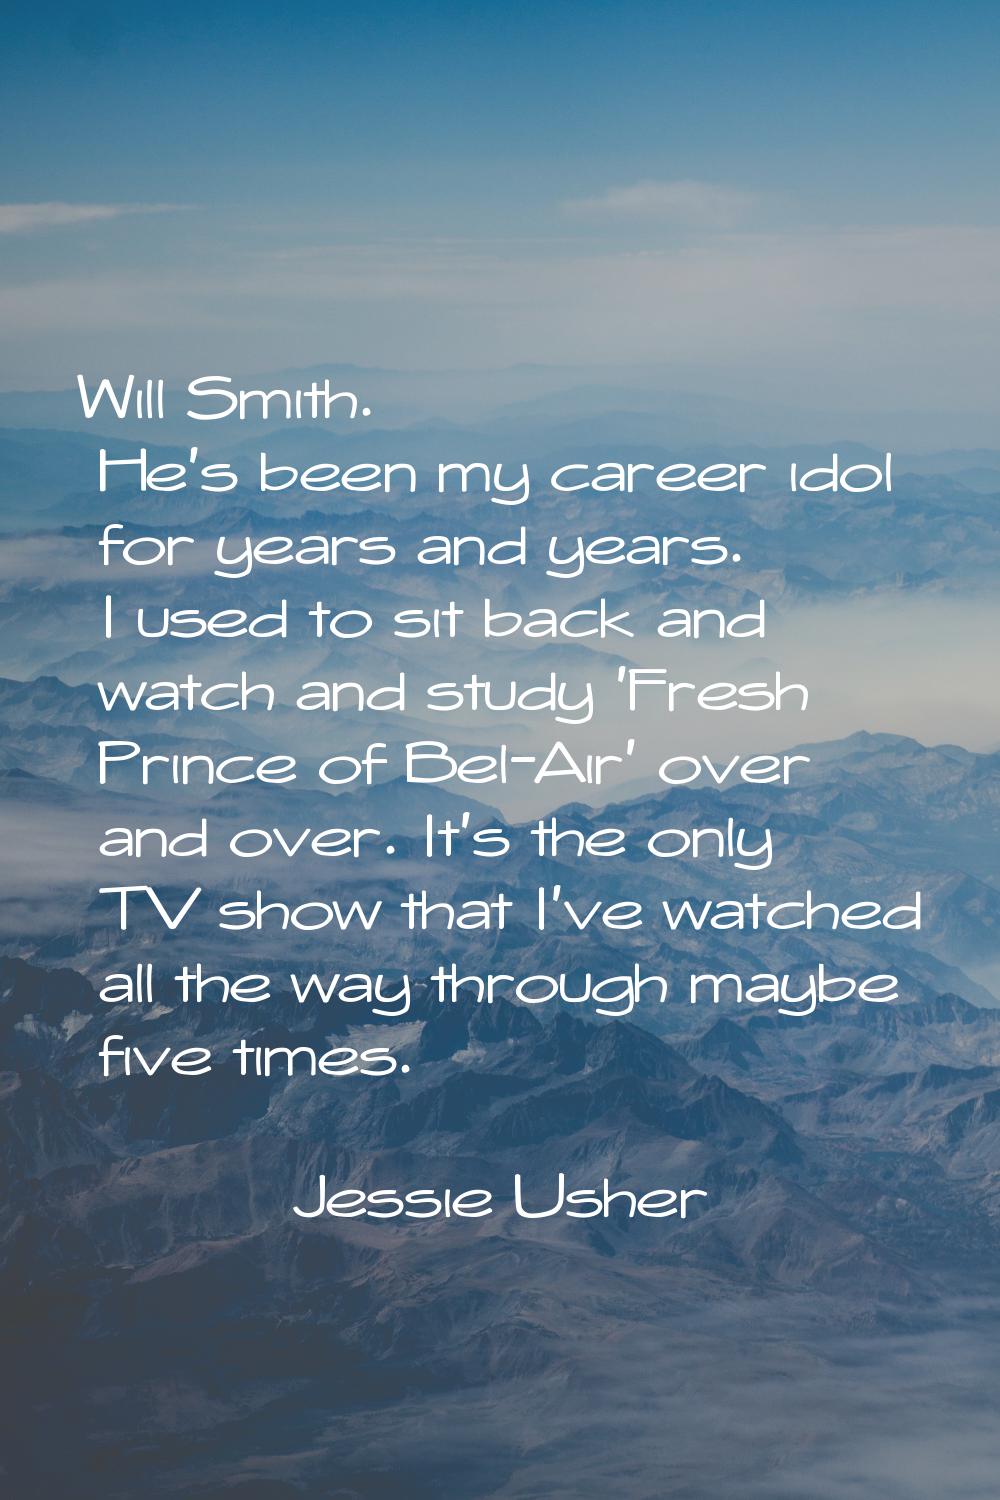 Will Smith. He's been my career idol for years and years. I used to sit back and watch and study 'F